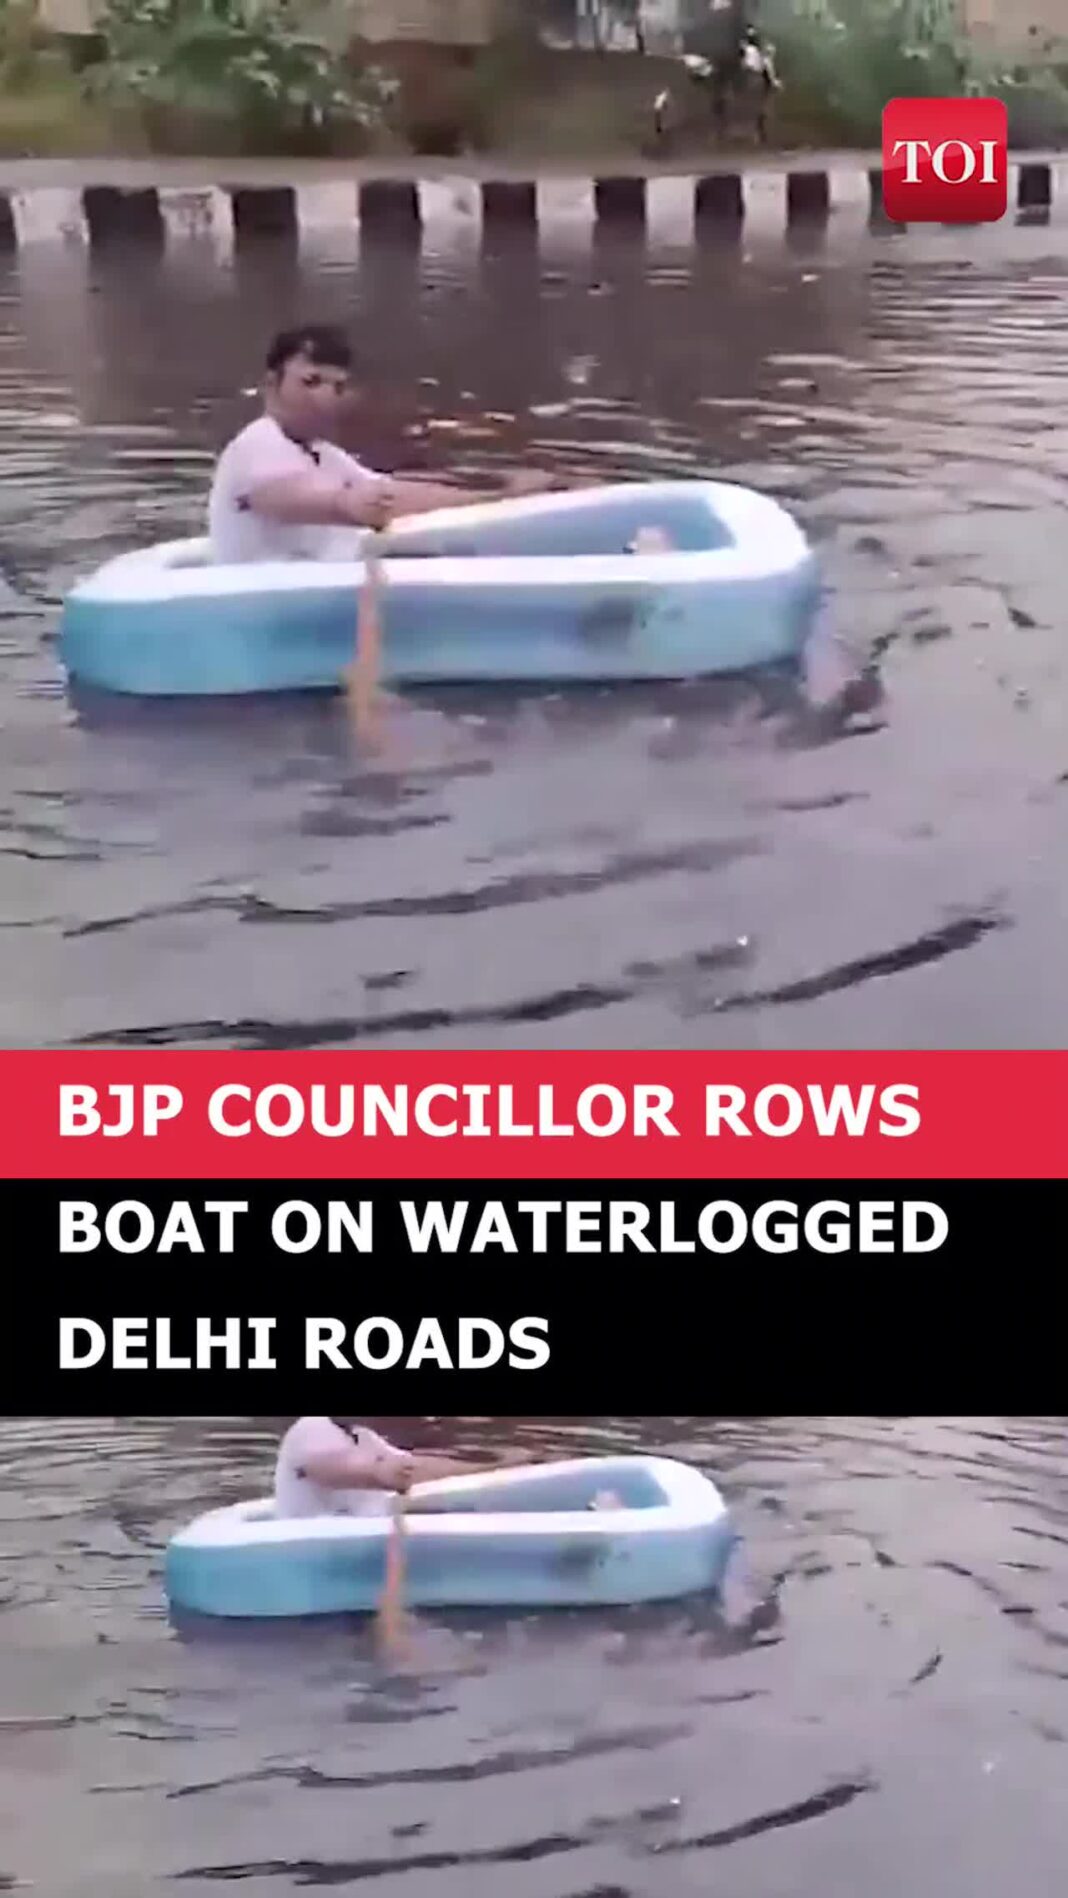 bjp-councillor-rows-boat-on-delhi-roads;-blames-aap-for-mess-after-rains